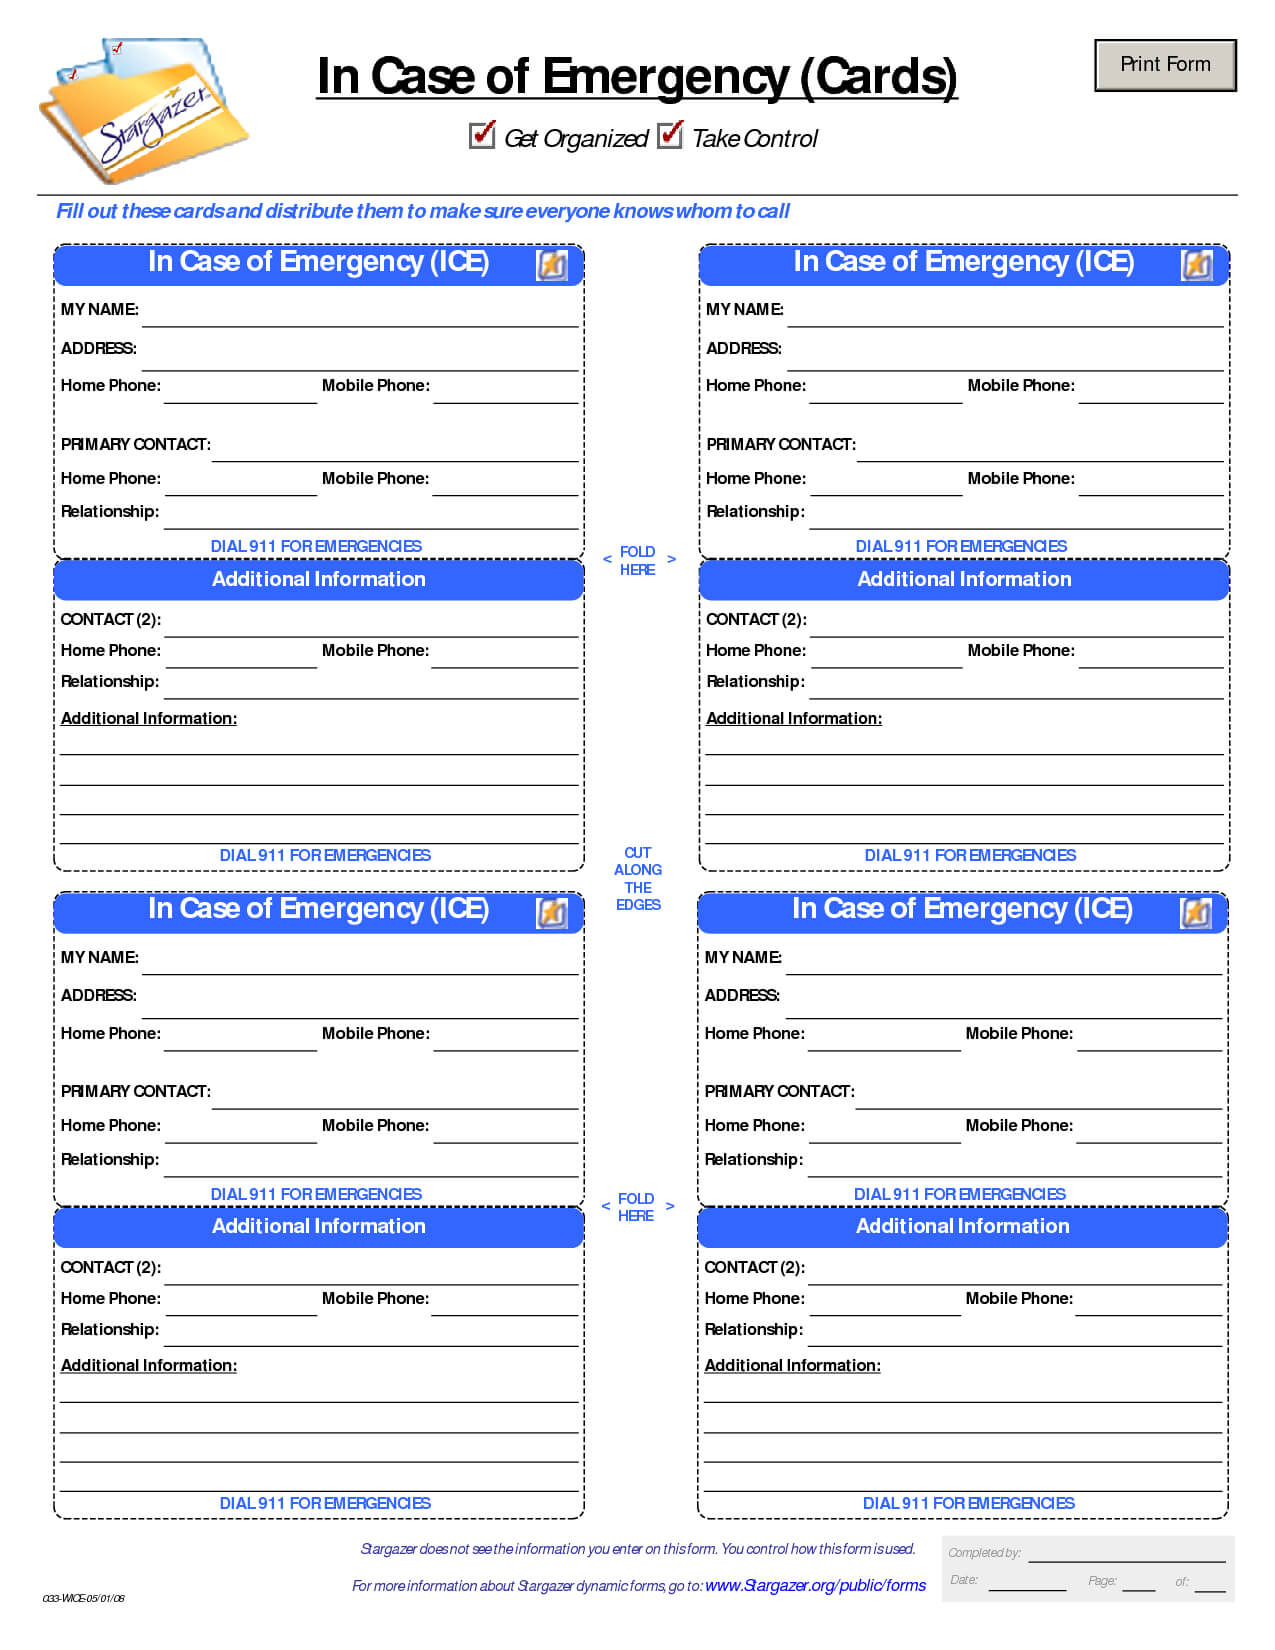 Patient Medication Card Template | Emergency Kits Inside Medication Card Template